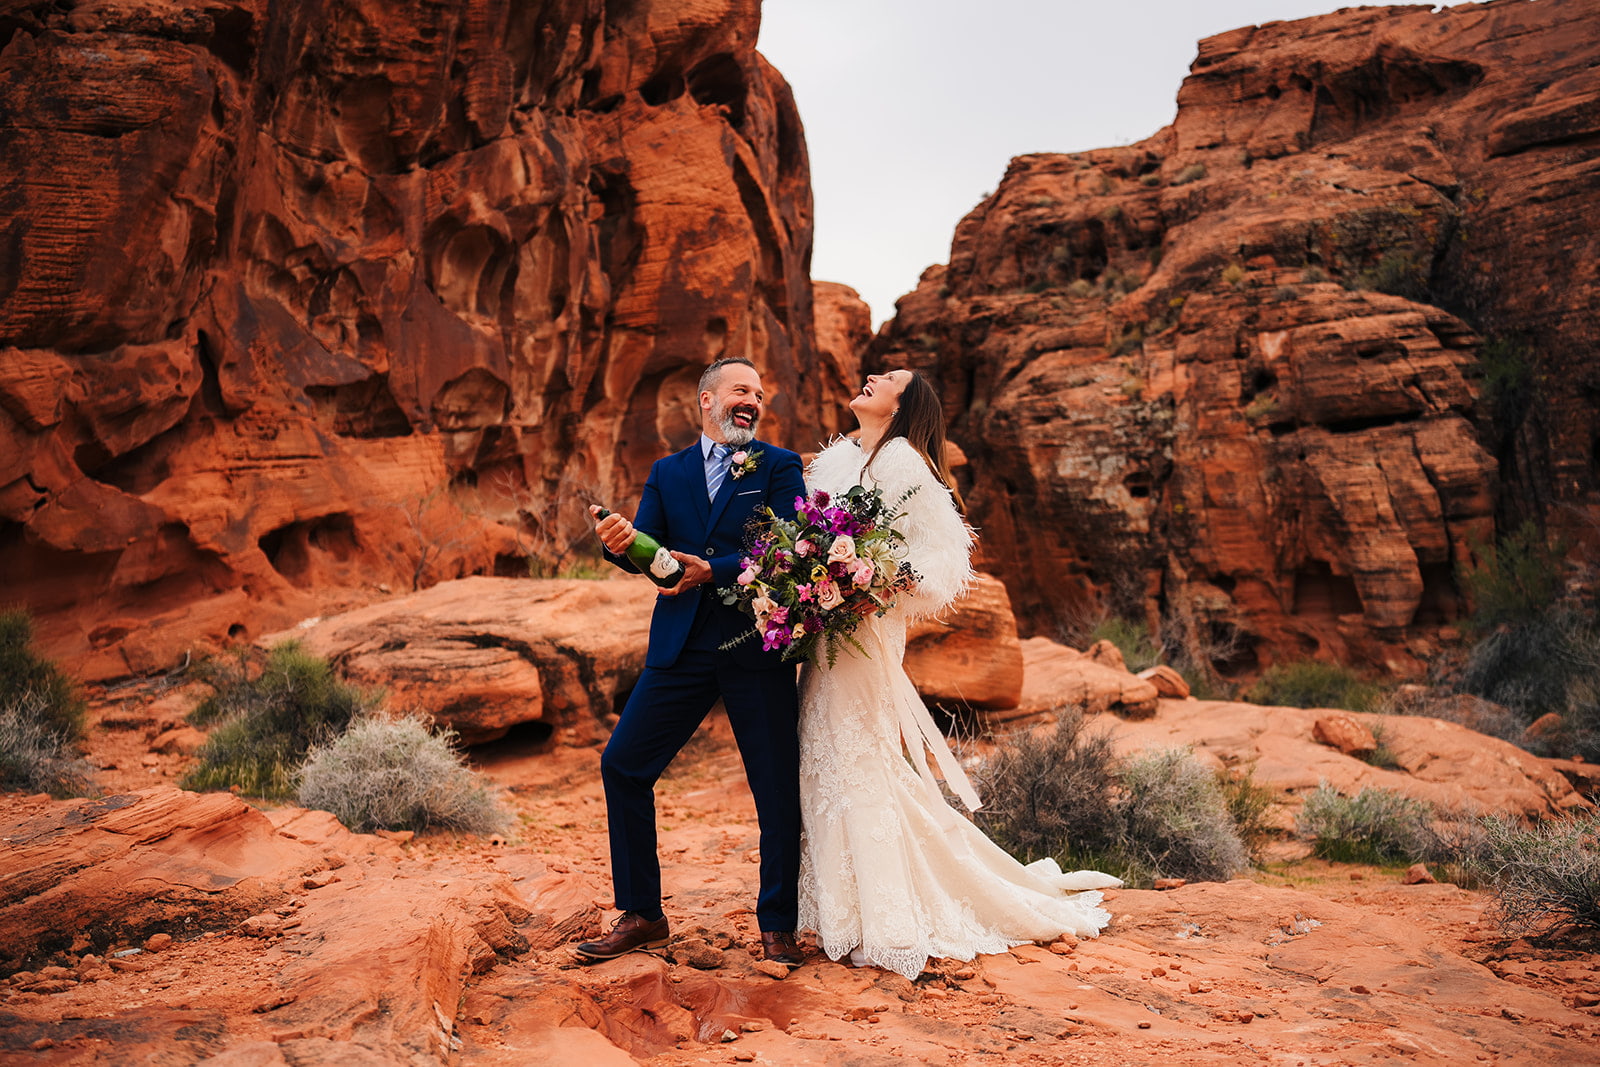 Newly wed couple enjoying their champagne at Valley of Fire.